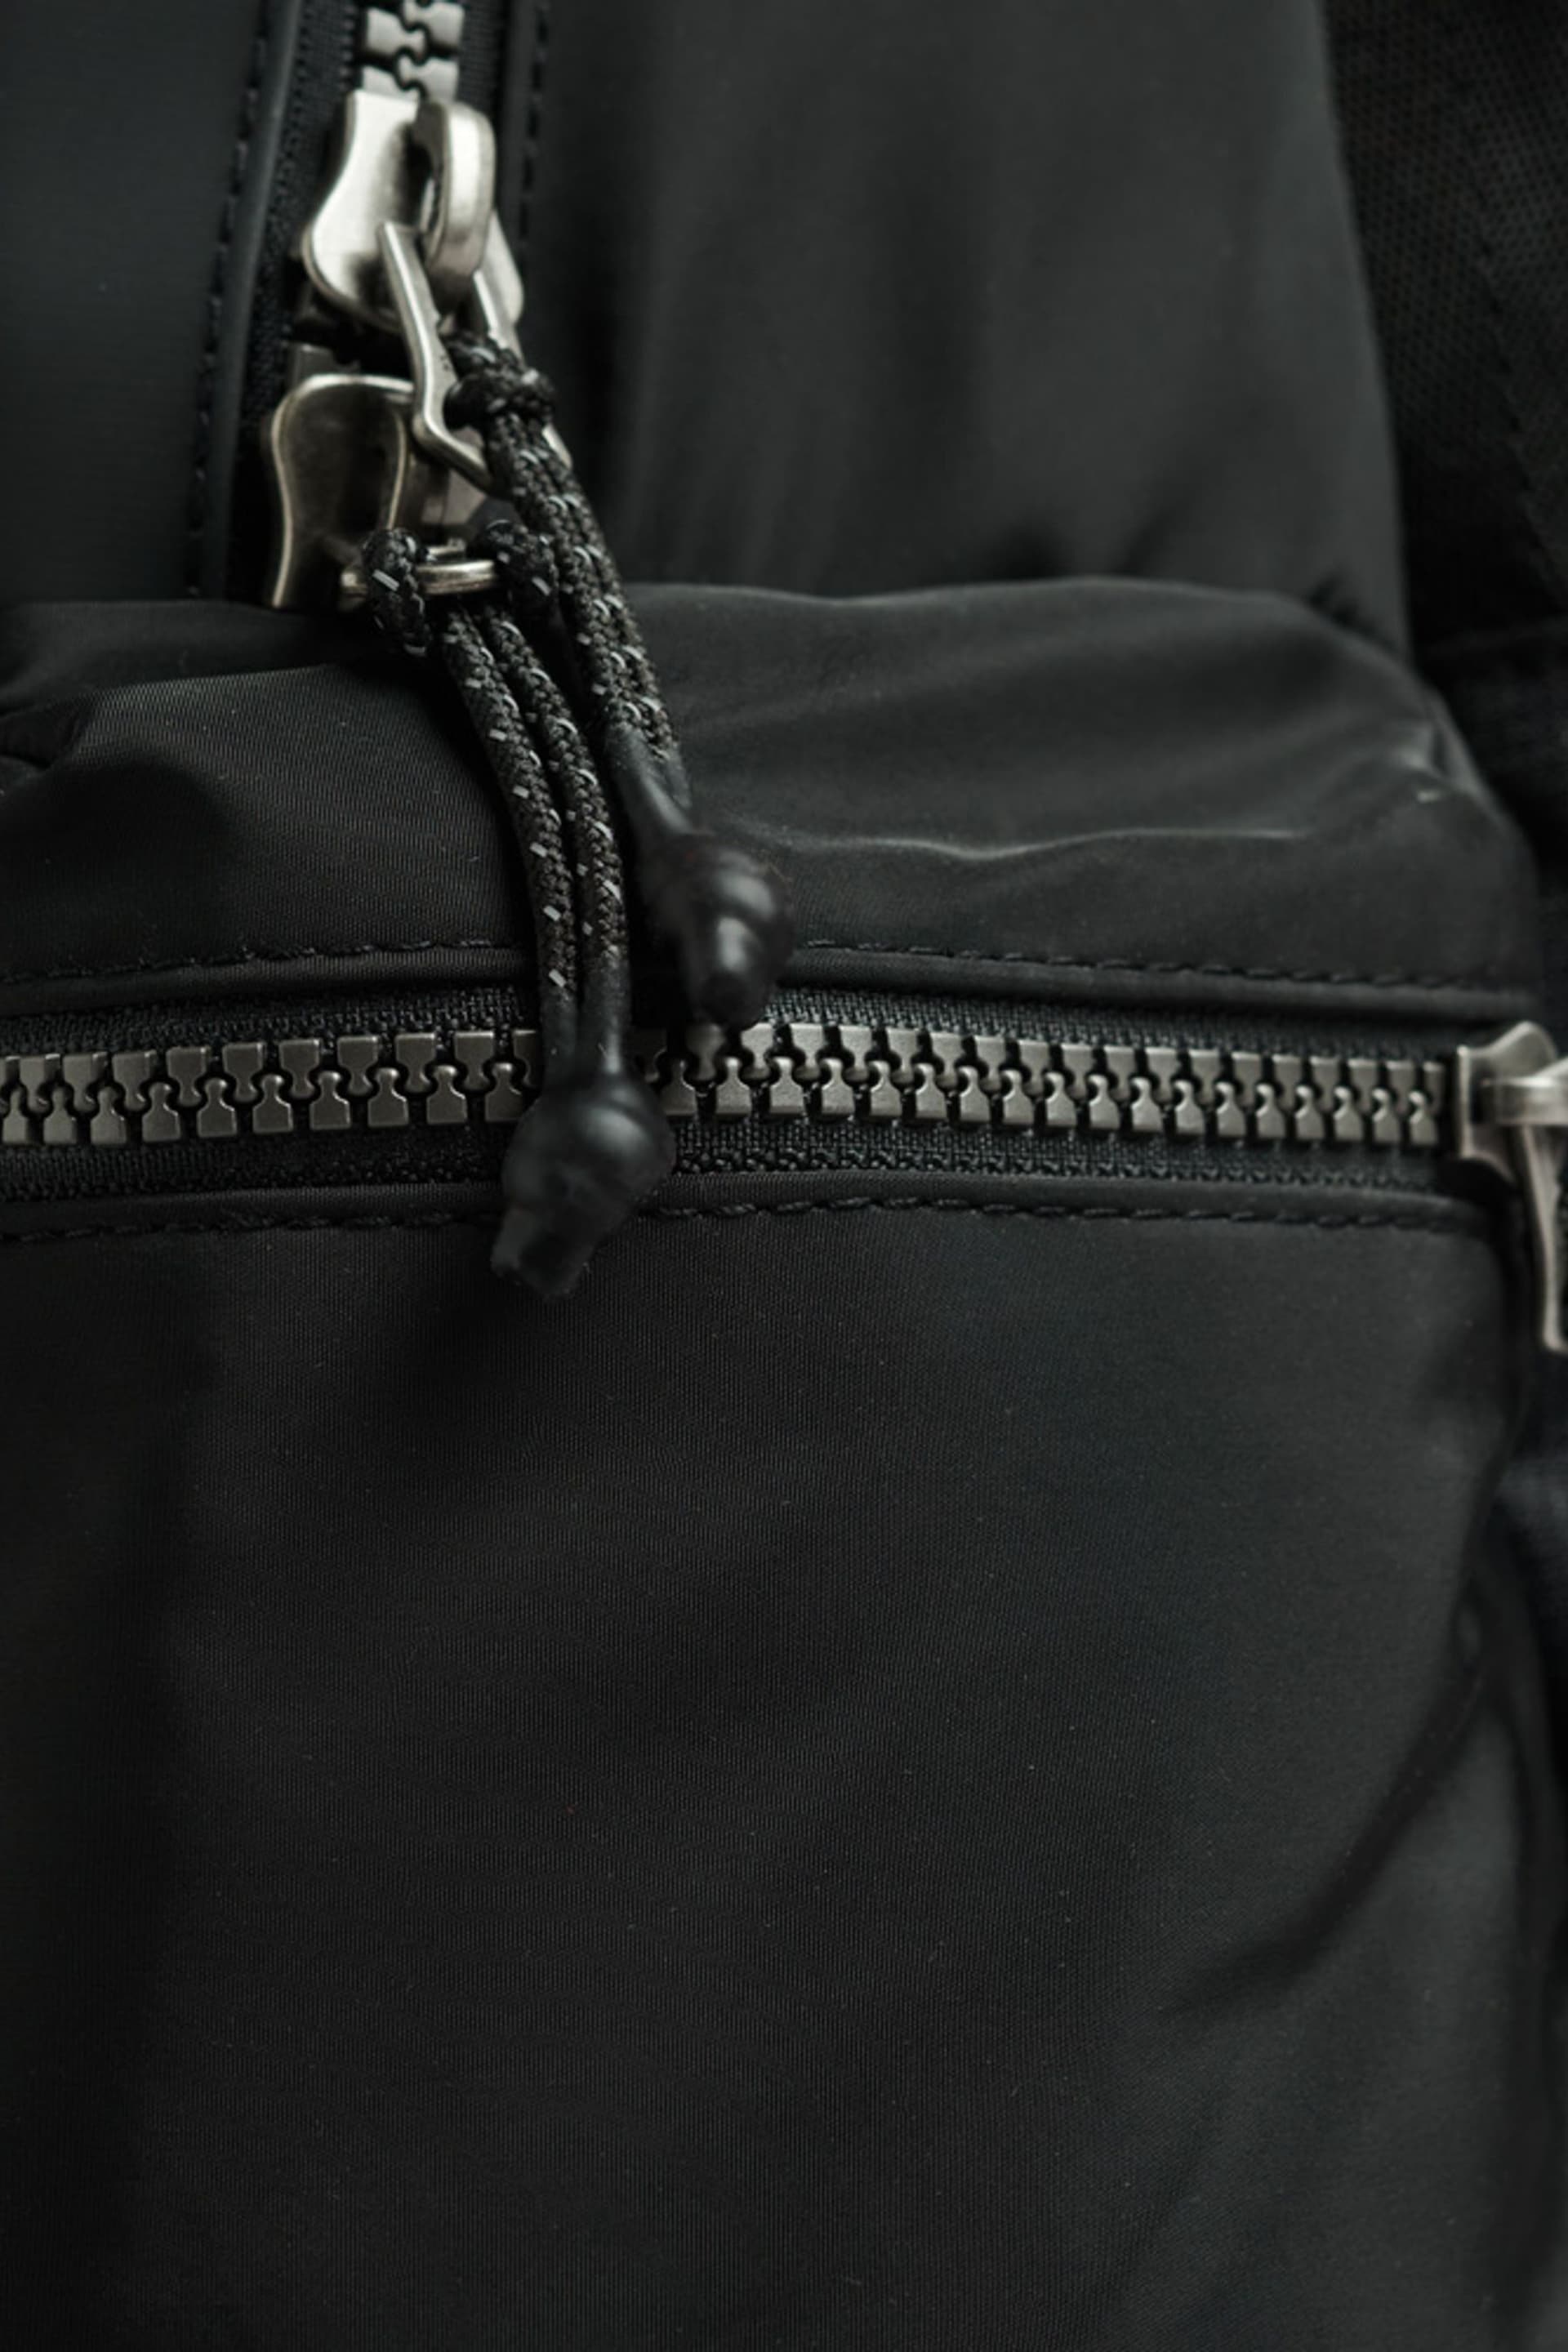 Superdry Black Mountain Tarp Graphic Backpack - Image 5 of 7